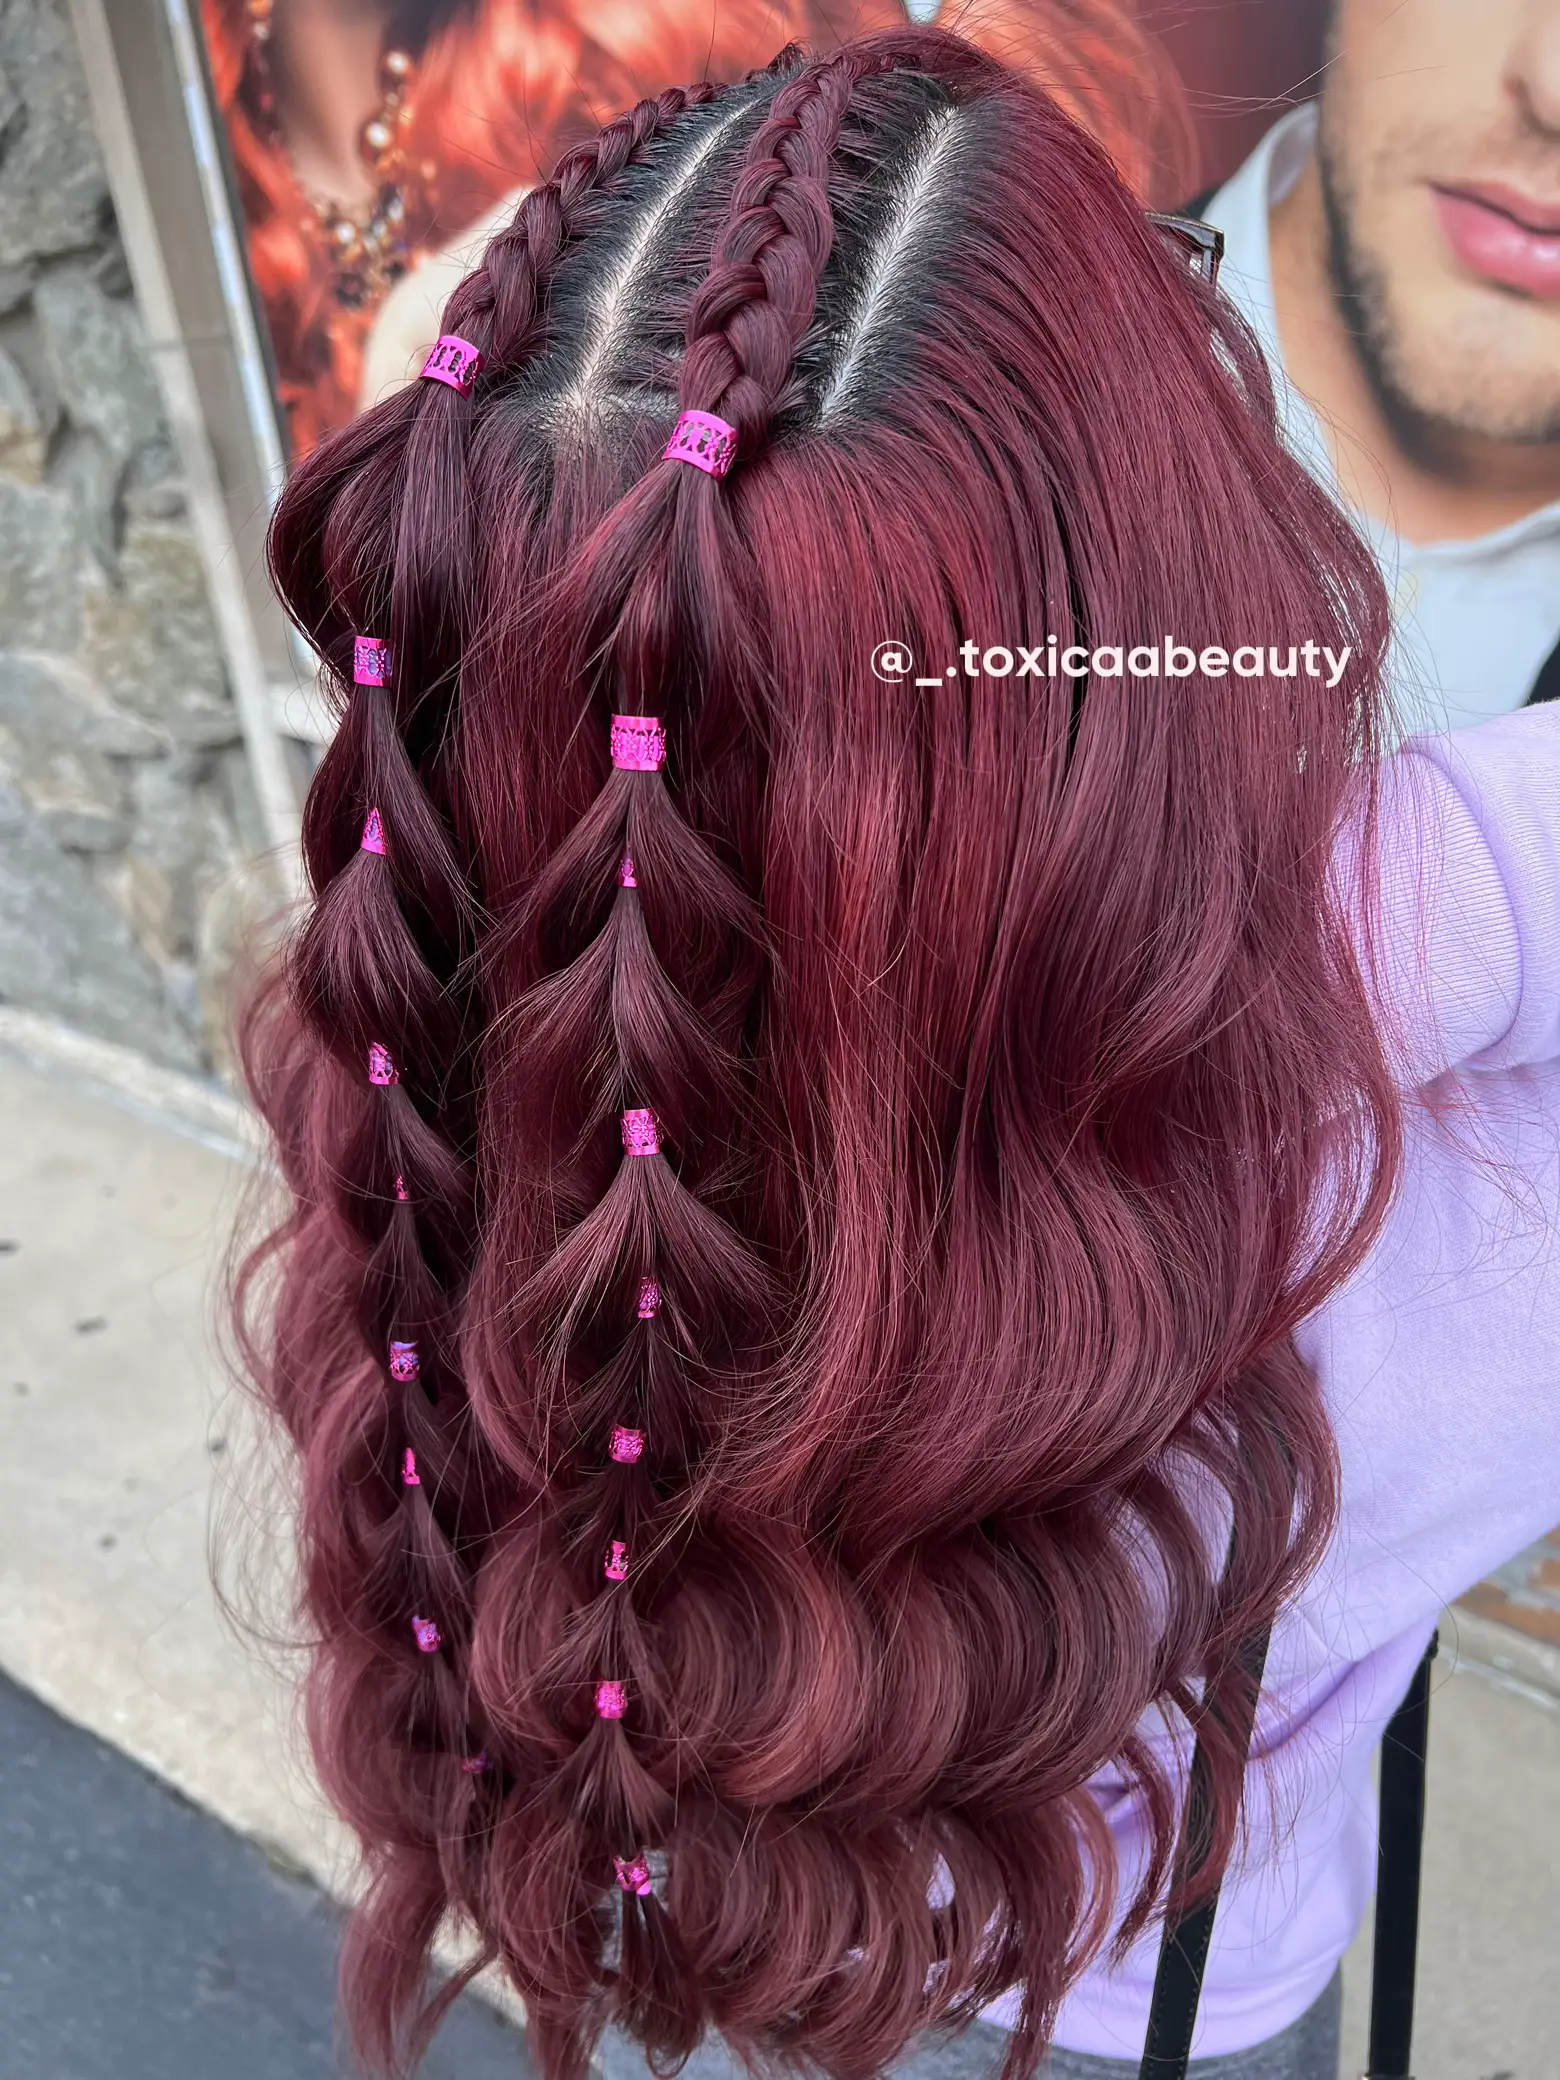 2022 Unique and beautiful hair styles ideas #braided hairstyle